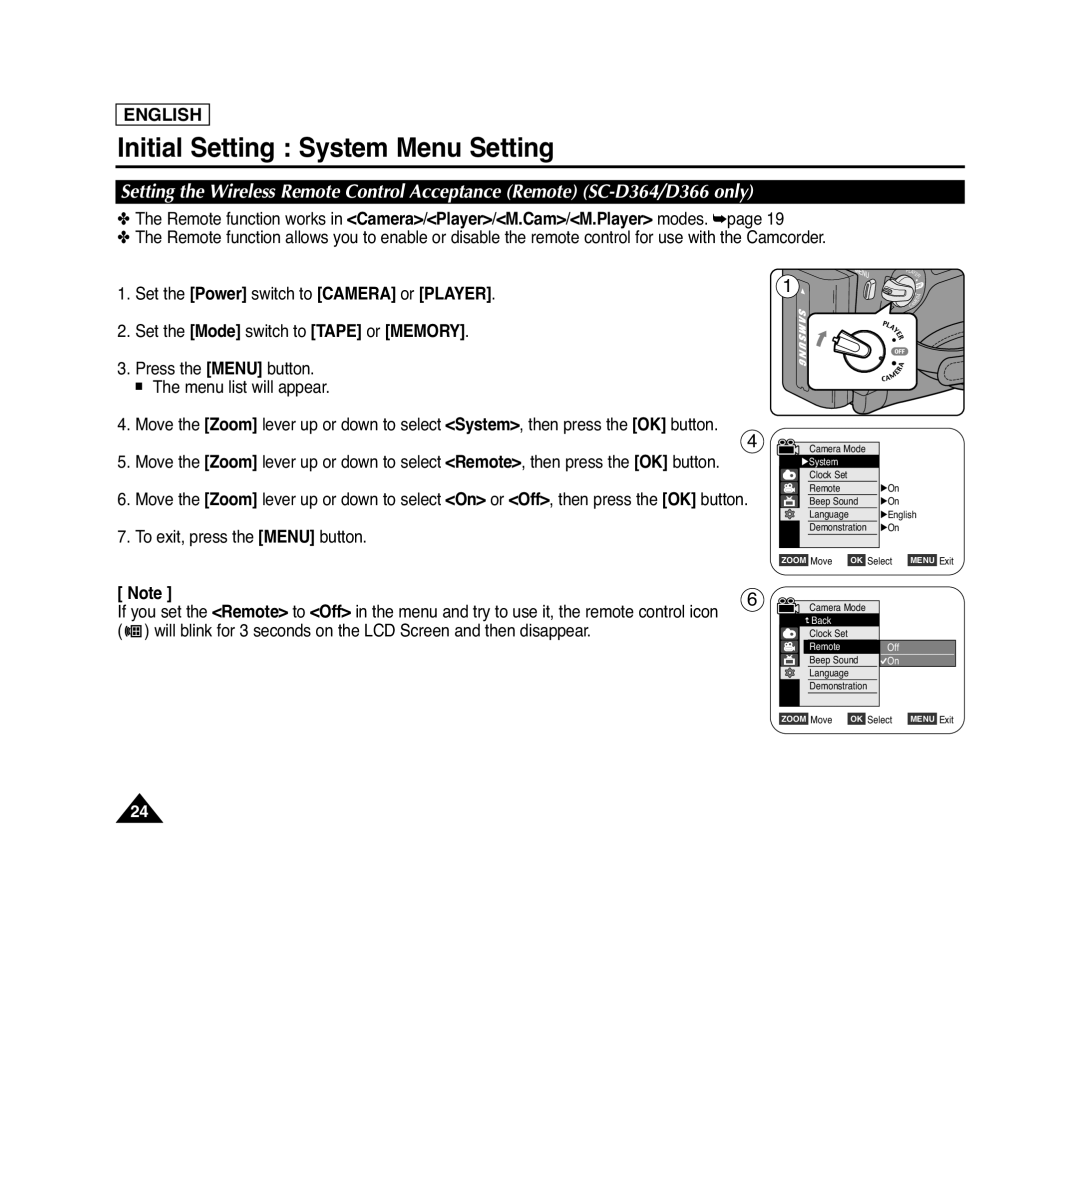 Samsung SC-D263, SC-D366, SC-D364 Initial Setting System Menu Setting, English, Set the Power switch to CAMERA or PLAYER 